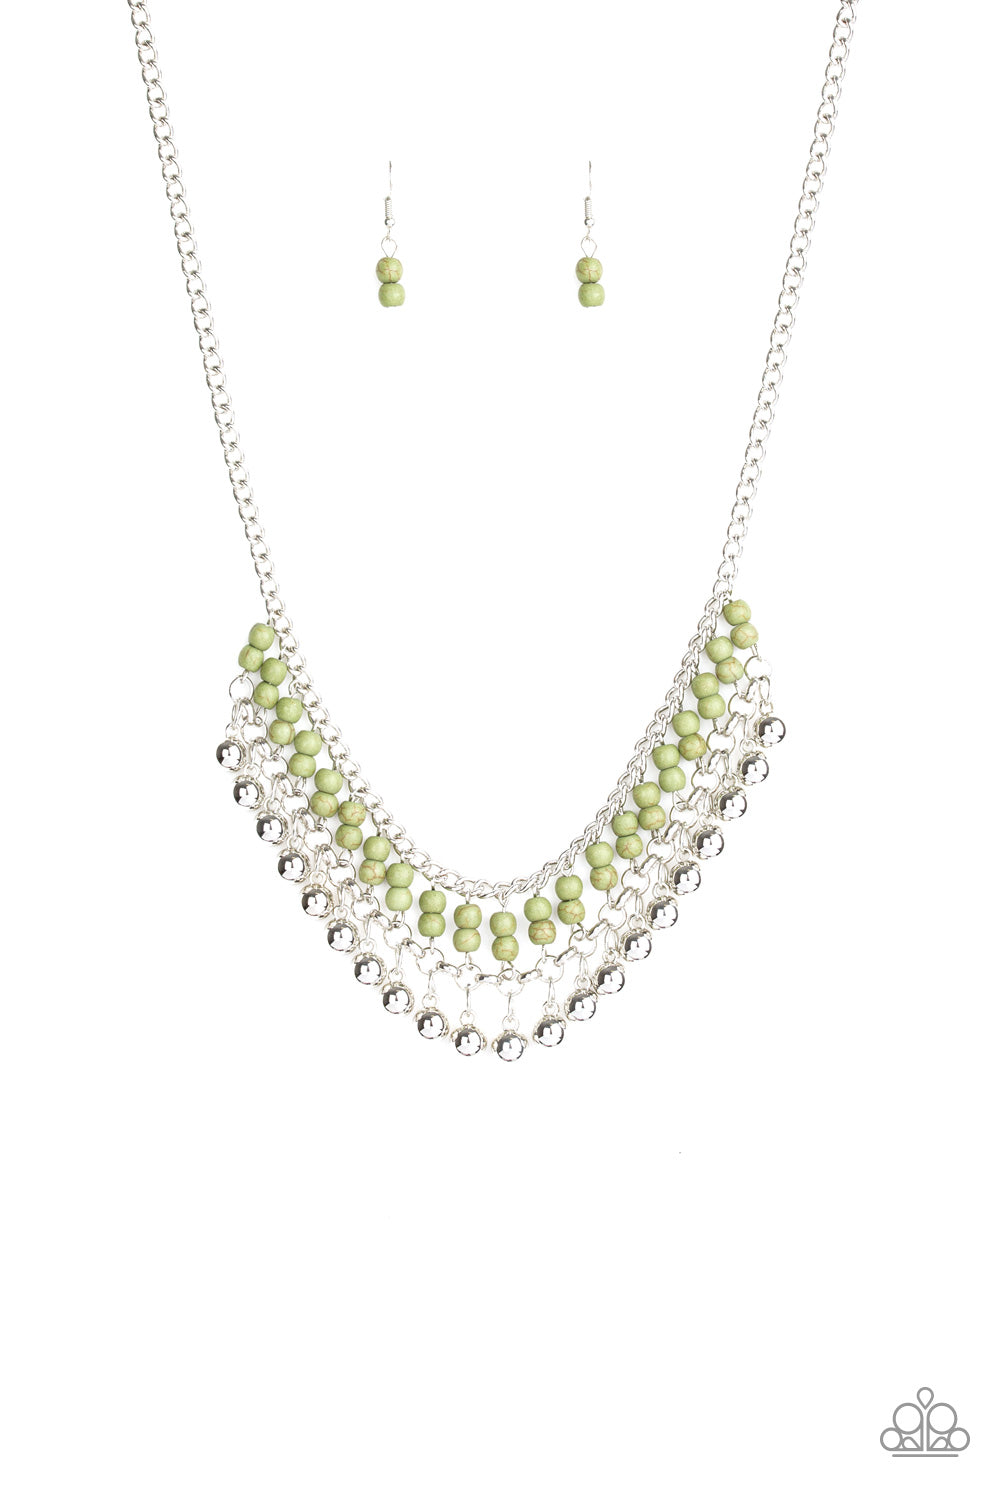 Beaded Bliss Necklace__Green